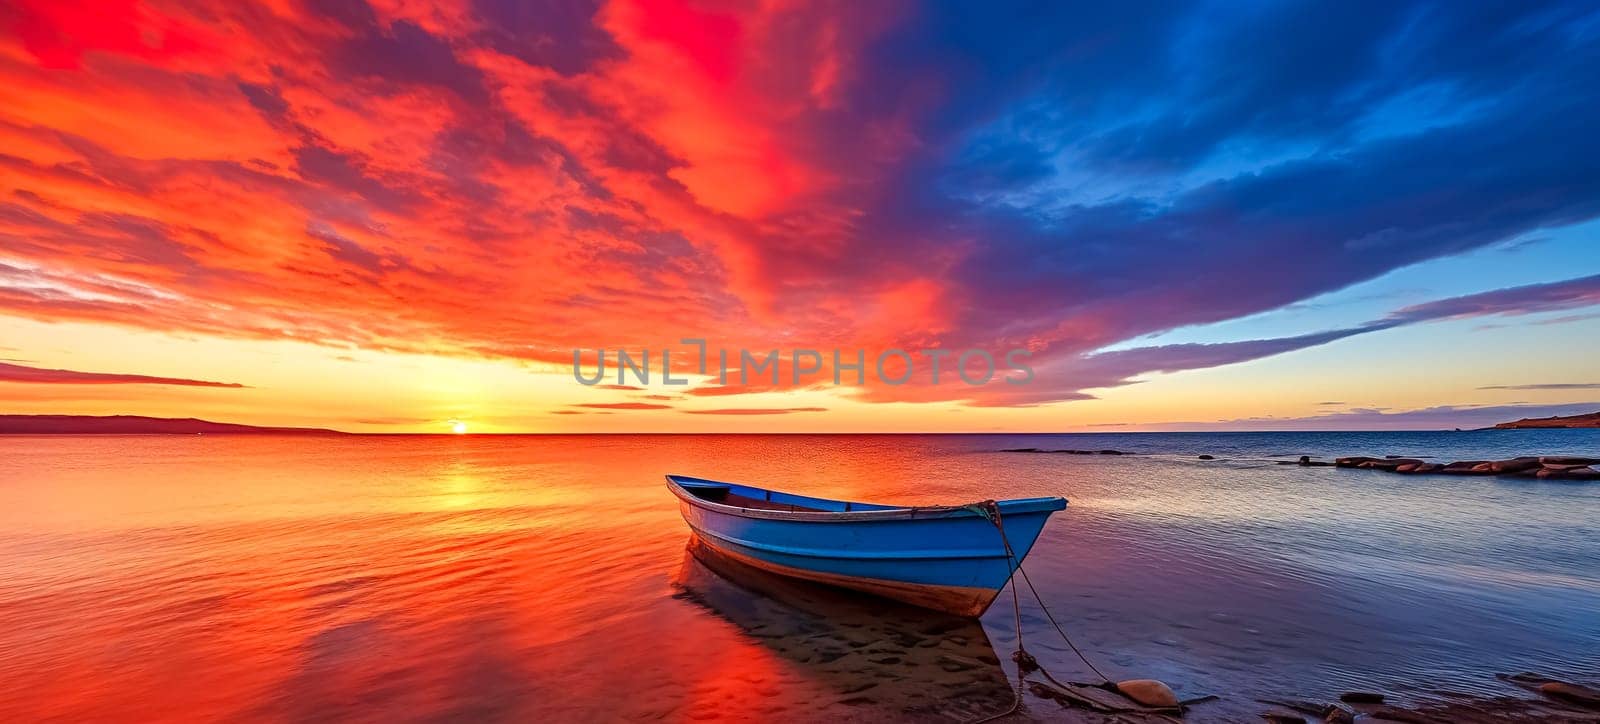 Dramatic sunset over the ocean with a solitary blue boat on the shore. banner with copy space